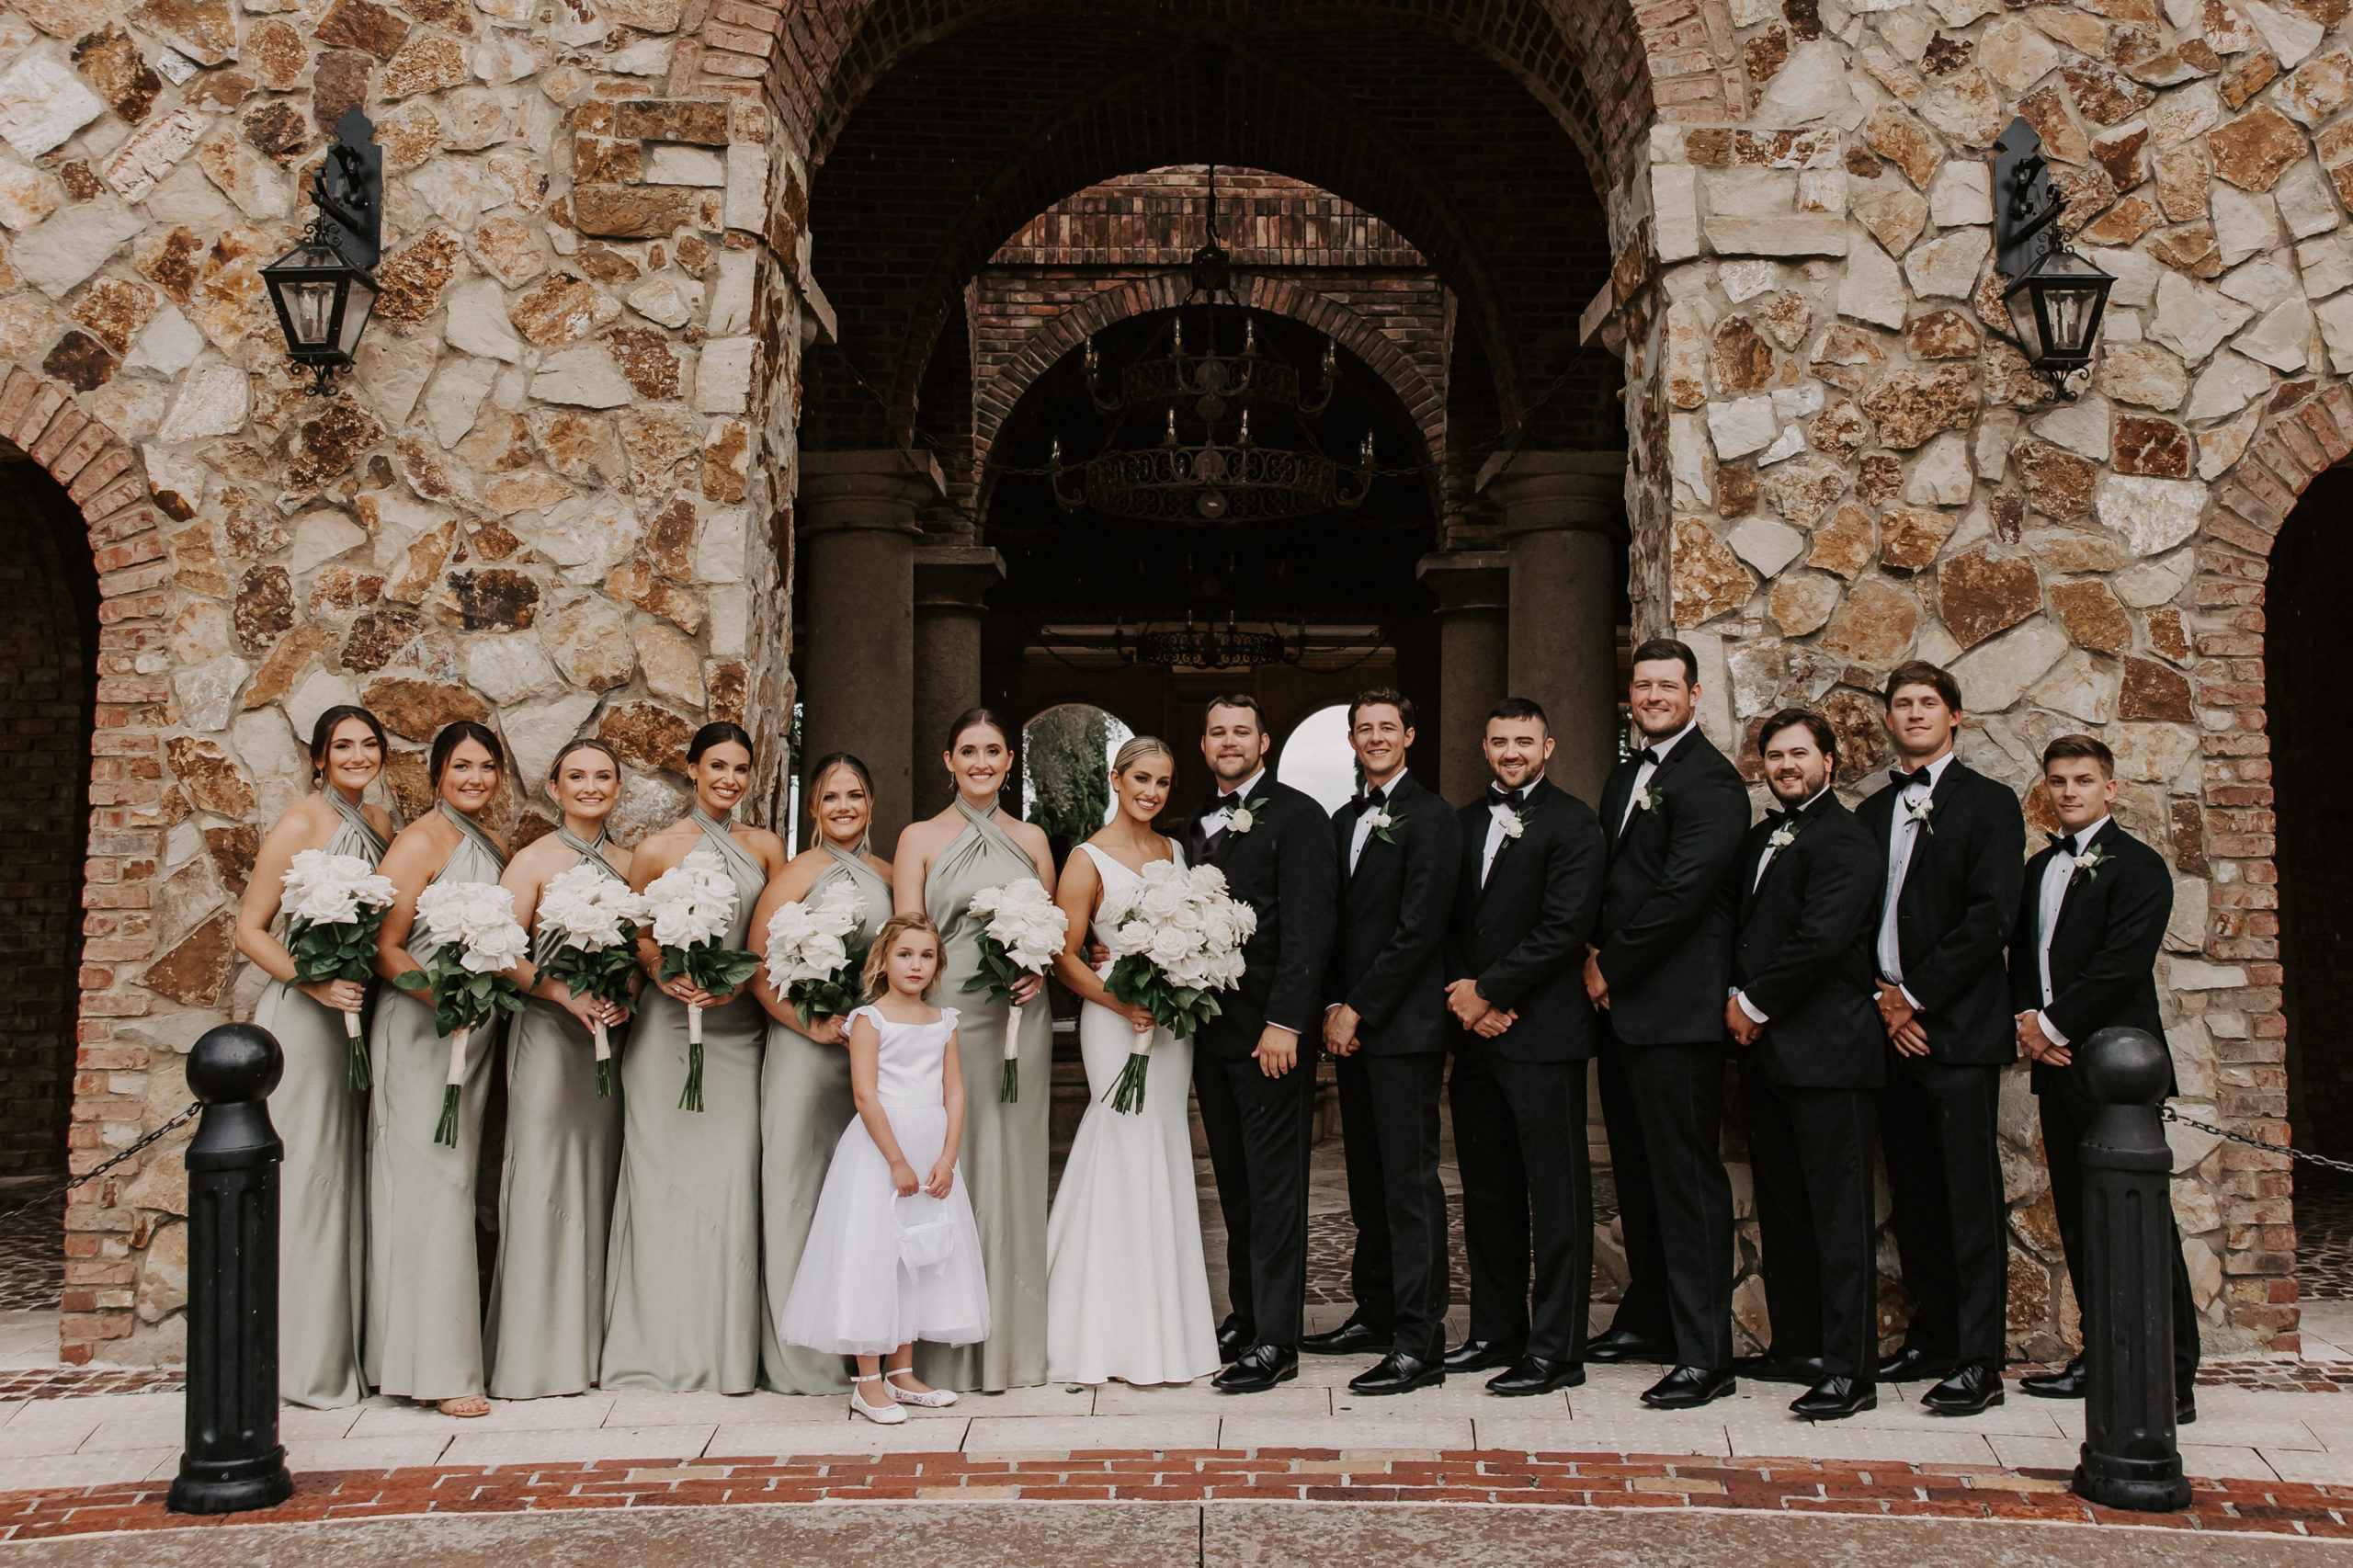 Groomsmen stayed cool in a classic black suit while bridesmaids were stunning in a chic sage gowns for this elegant and timeless wedding. 